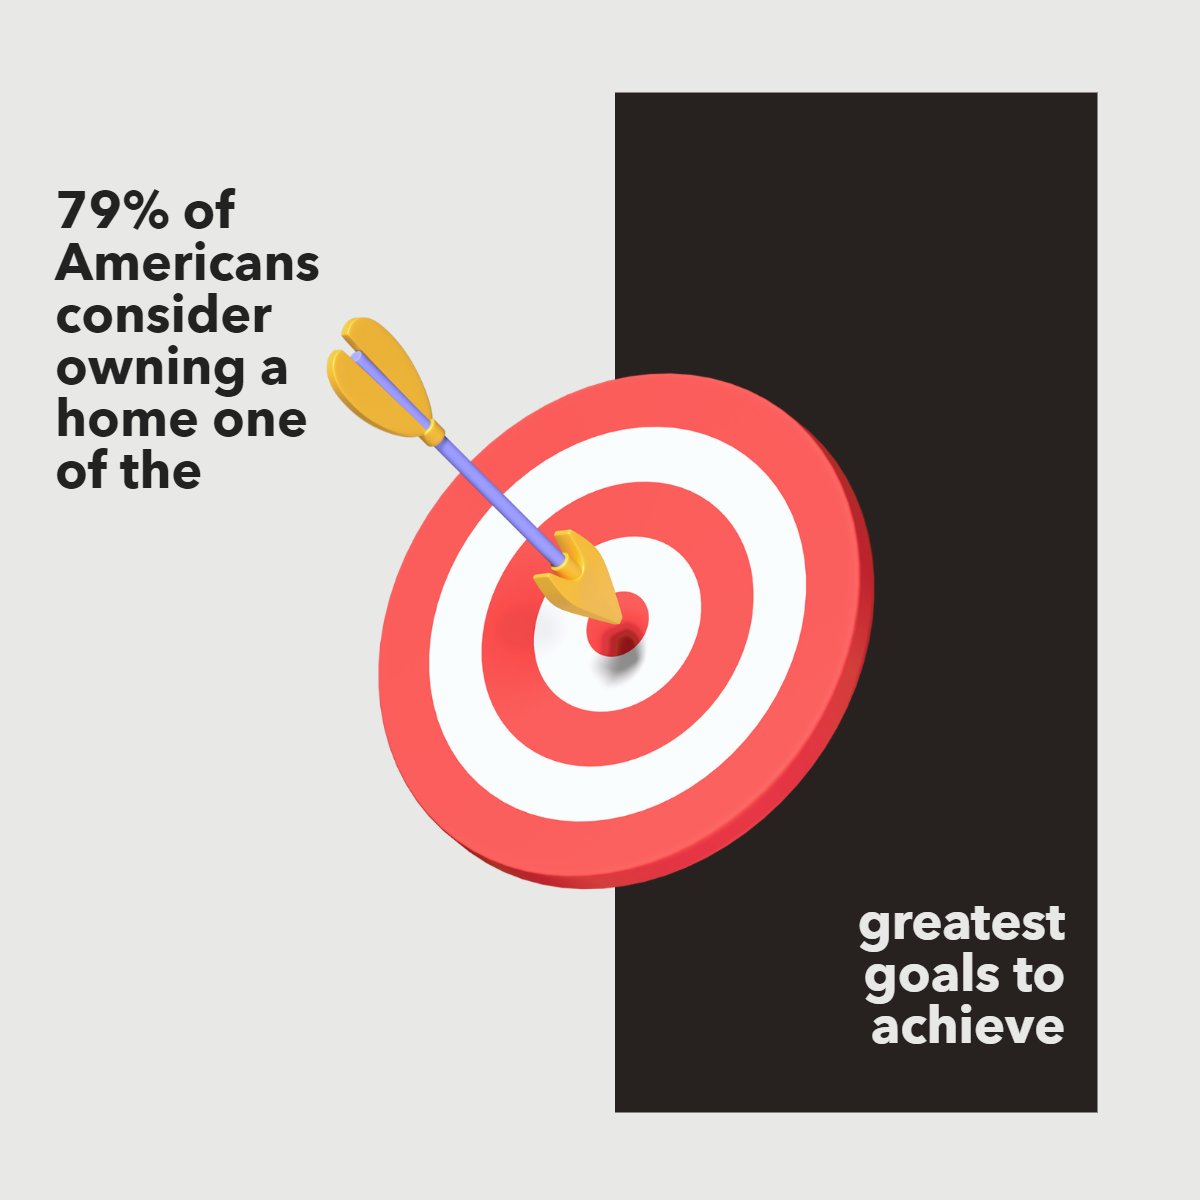 What do you consider a goal in your life? 🤔

Let us know below!

#didyouknow #didyouknowfacts #manhattan #factoftheday #realestatefact
 #realestate #buy #purchase #firsttimehomebuyer #fha #chase #zillow #rockland #bergen #westchester #listingagent #forsale #appraisal